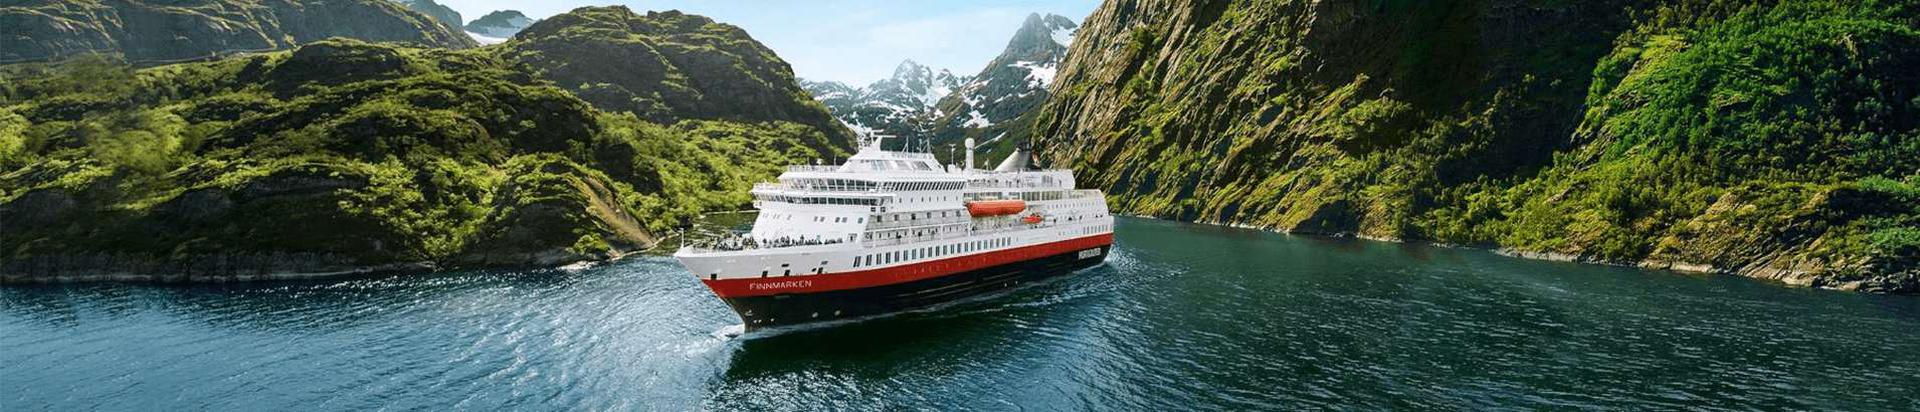 Hurtigruten offers expeditions to Antarctica and the Arctic, as well as coastal cruises along the stunning Norwegian coast. Join our explorations of the world for an authentic and immersive experience.